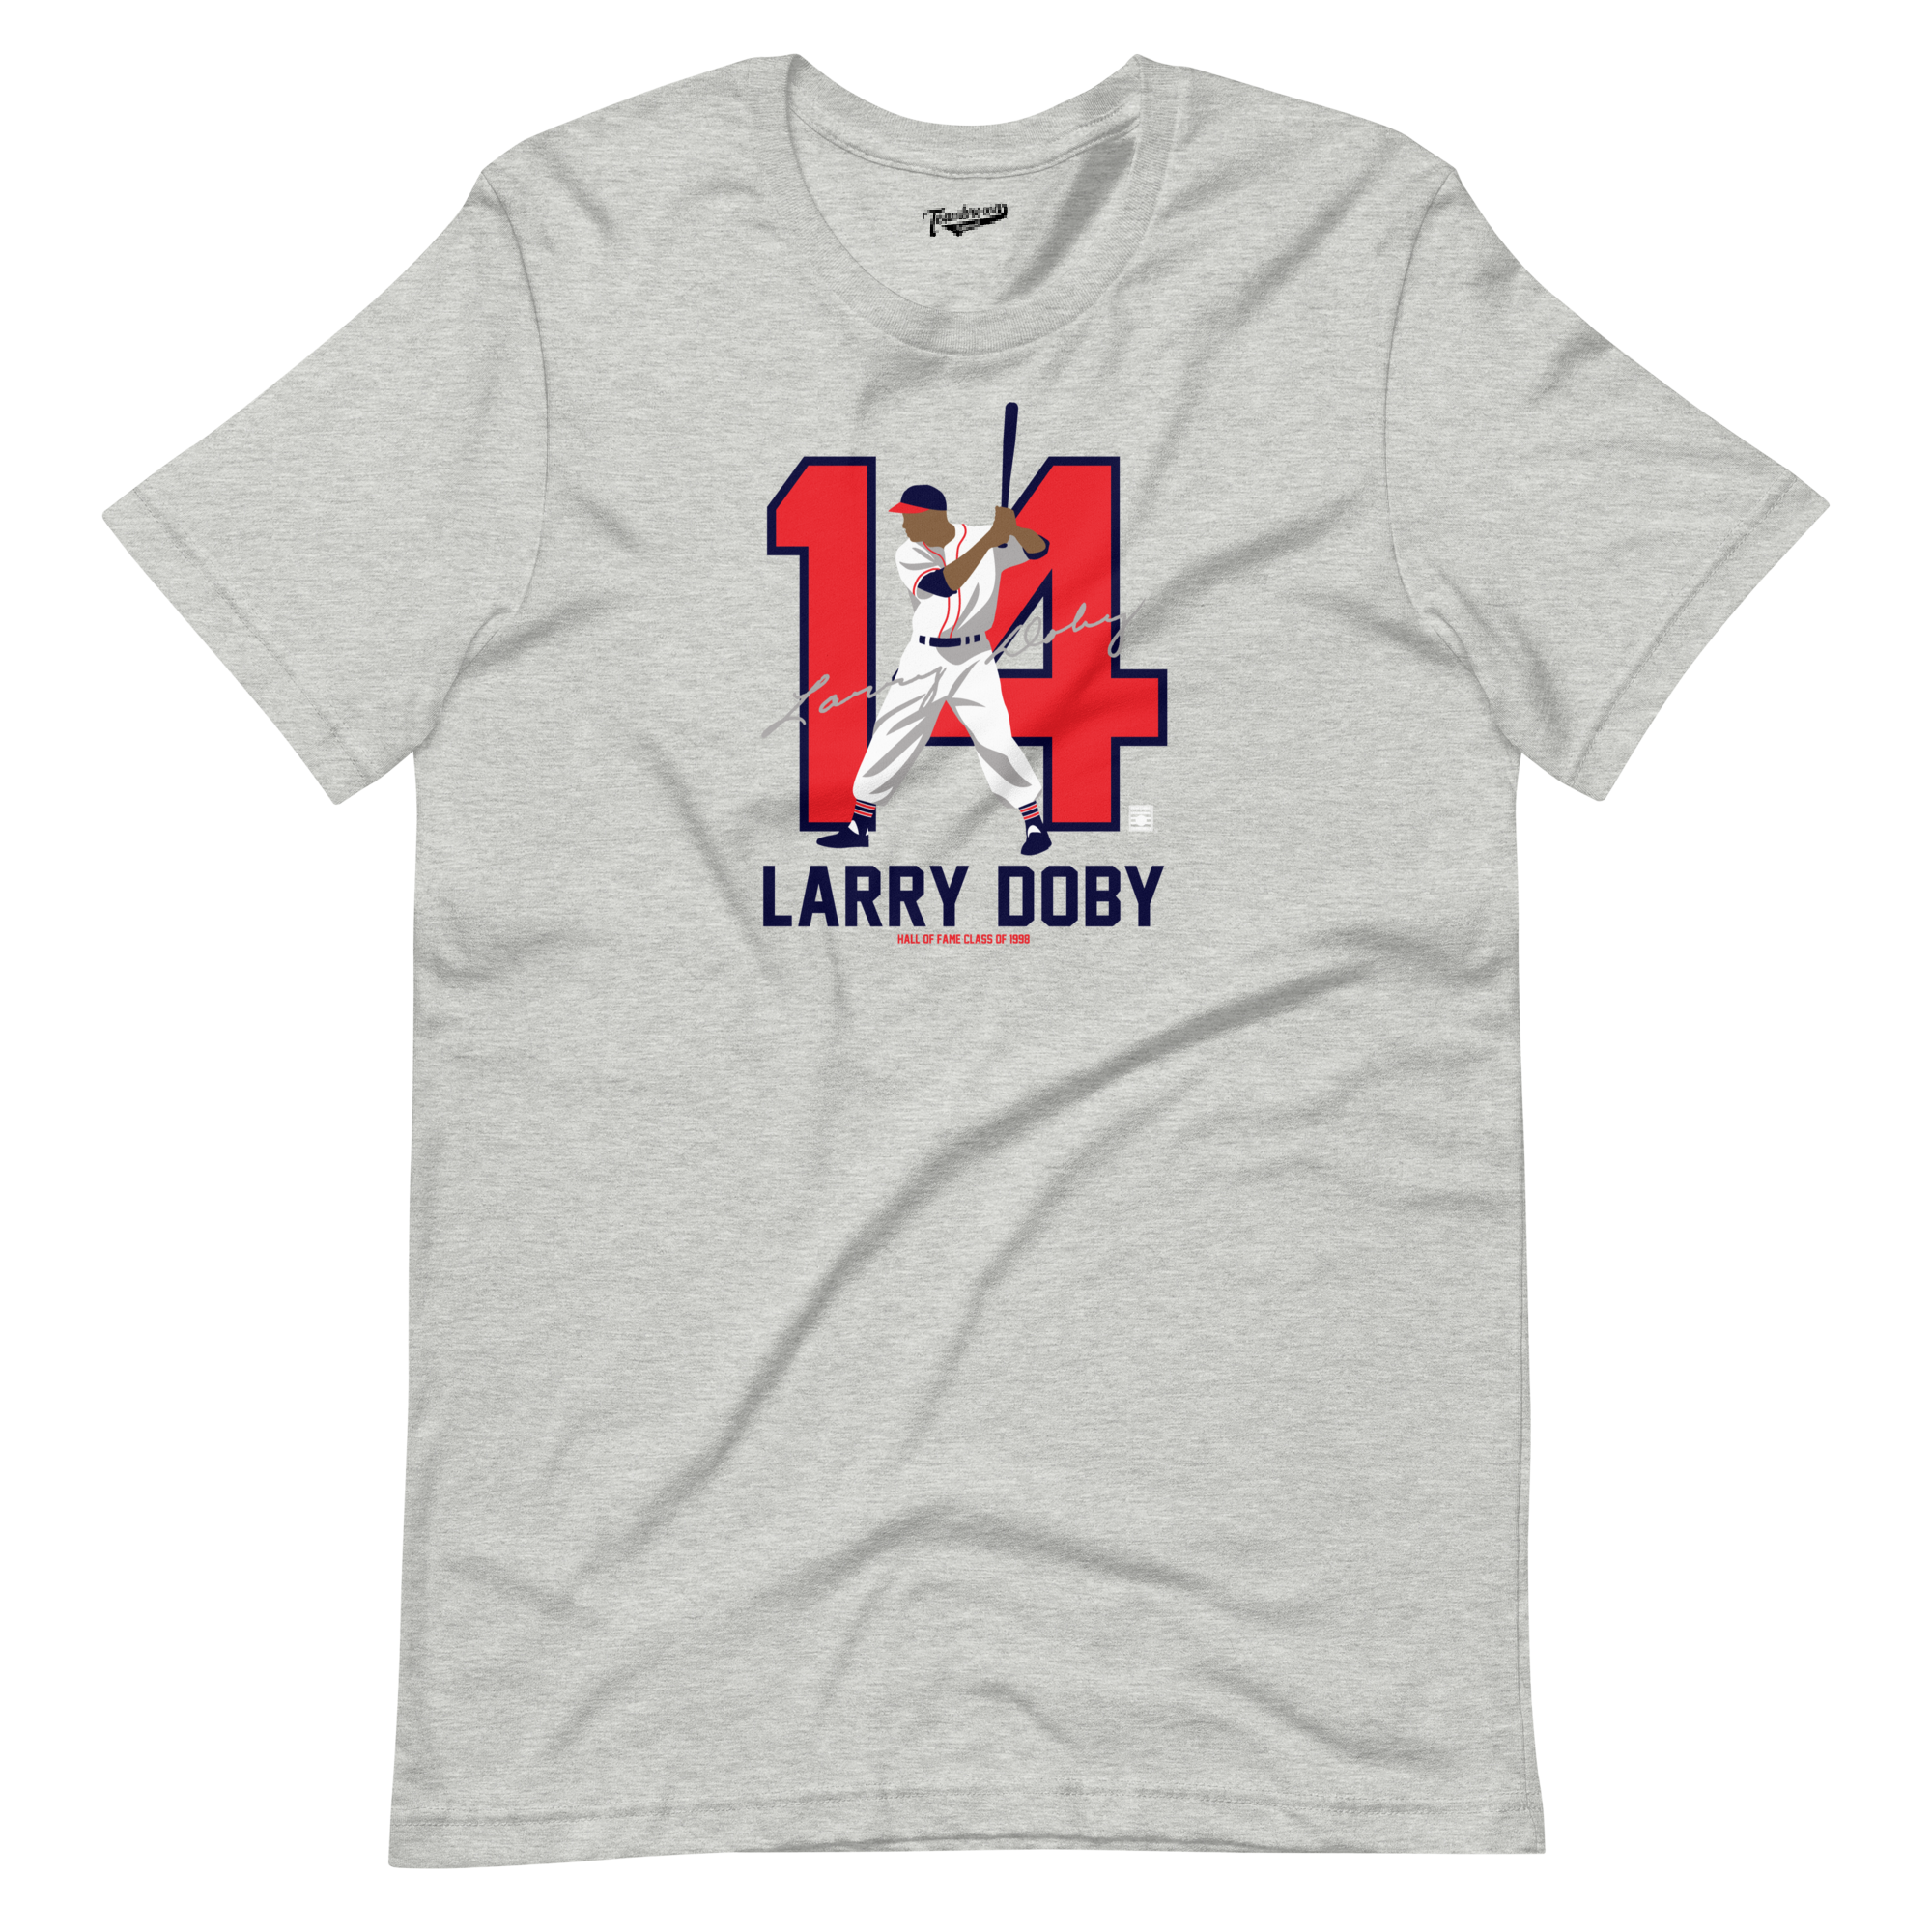 Baseball Hall of Fame Members - Larry Doby - Silhouette - Unisex T-Shirt